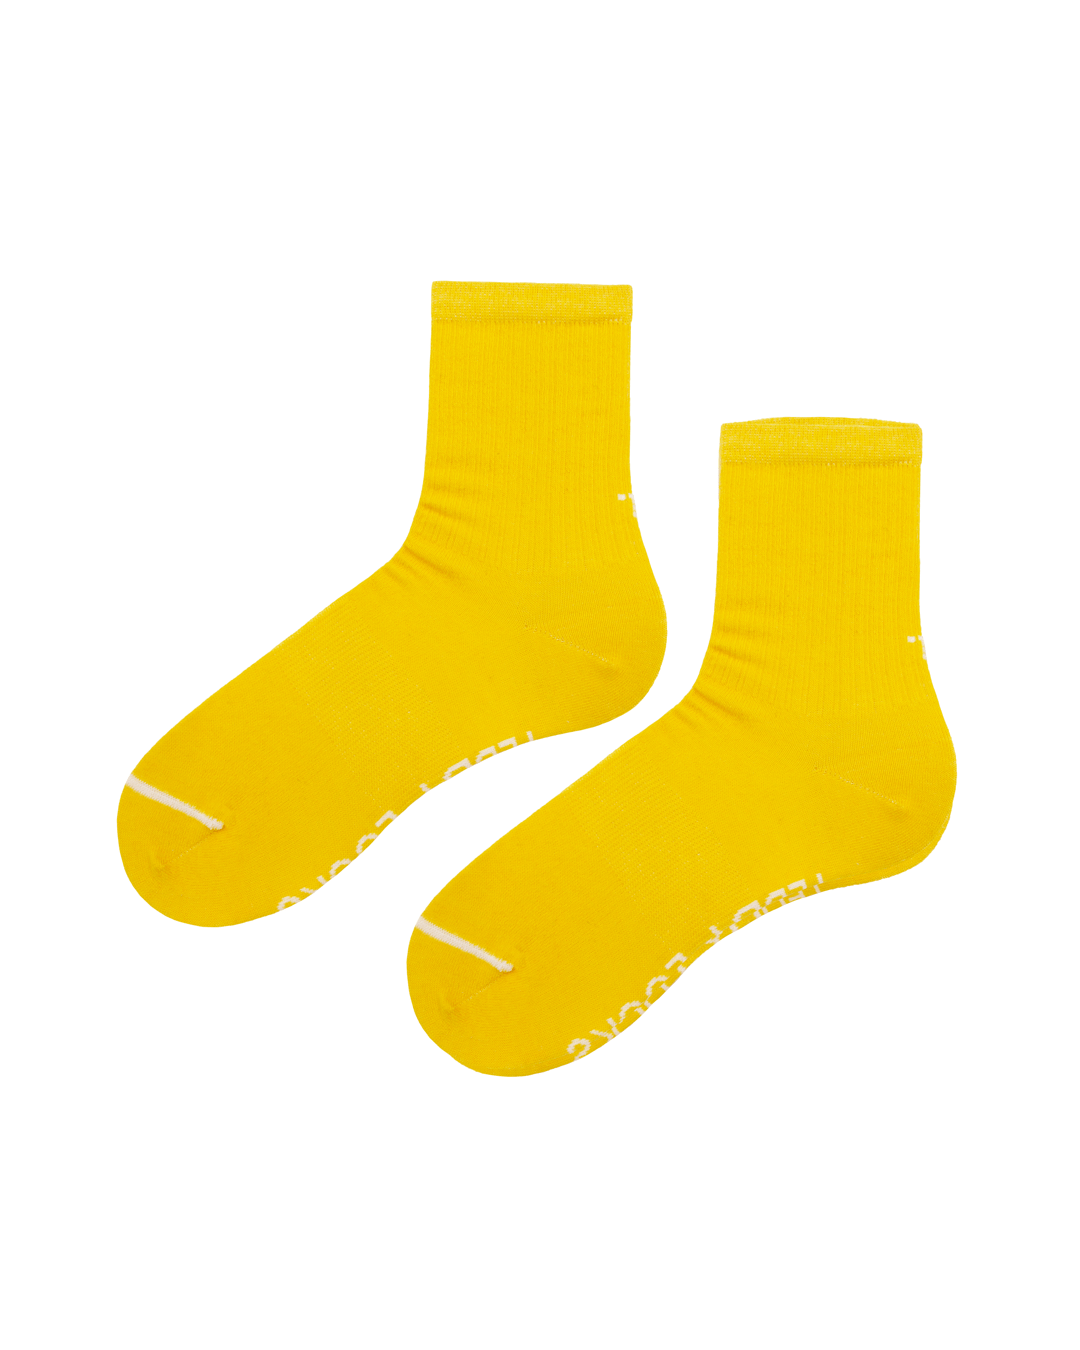 Yellow athletic ribbed socks. Sport socks with arch support,